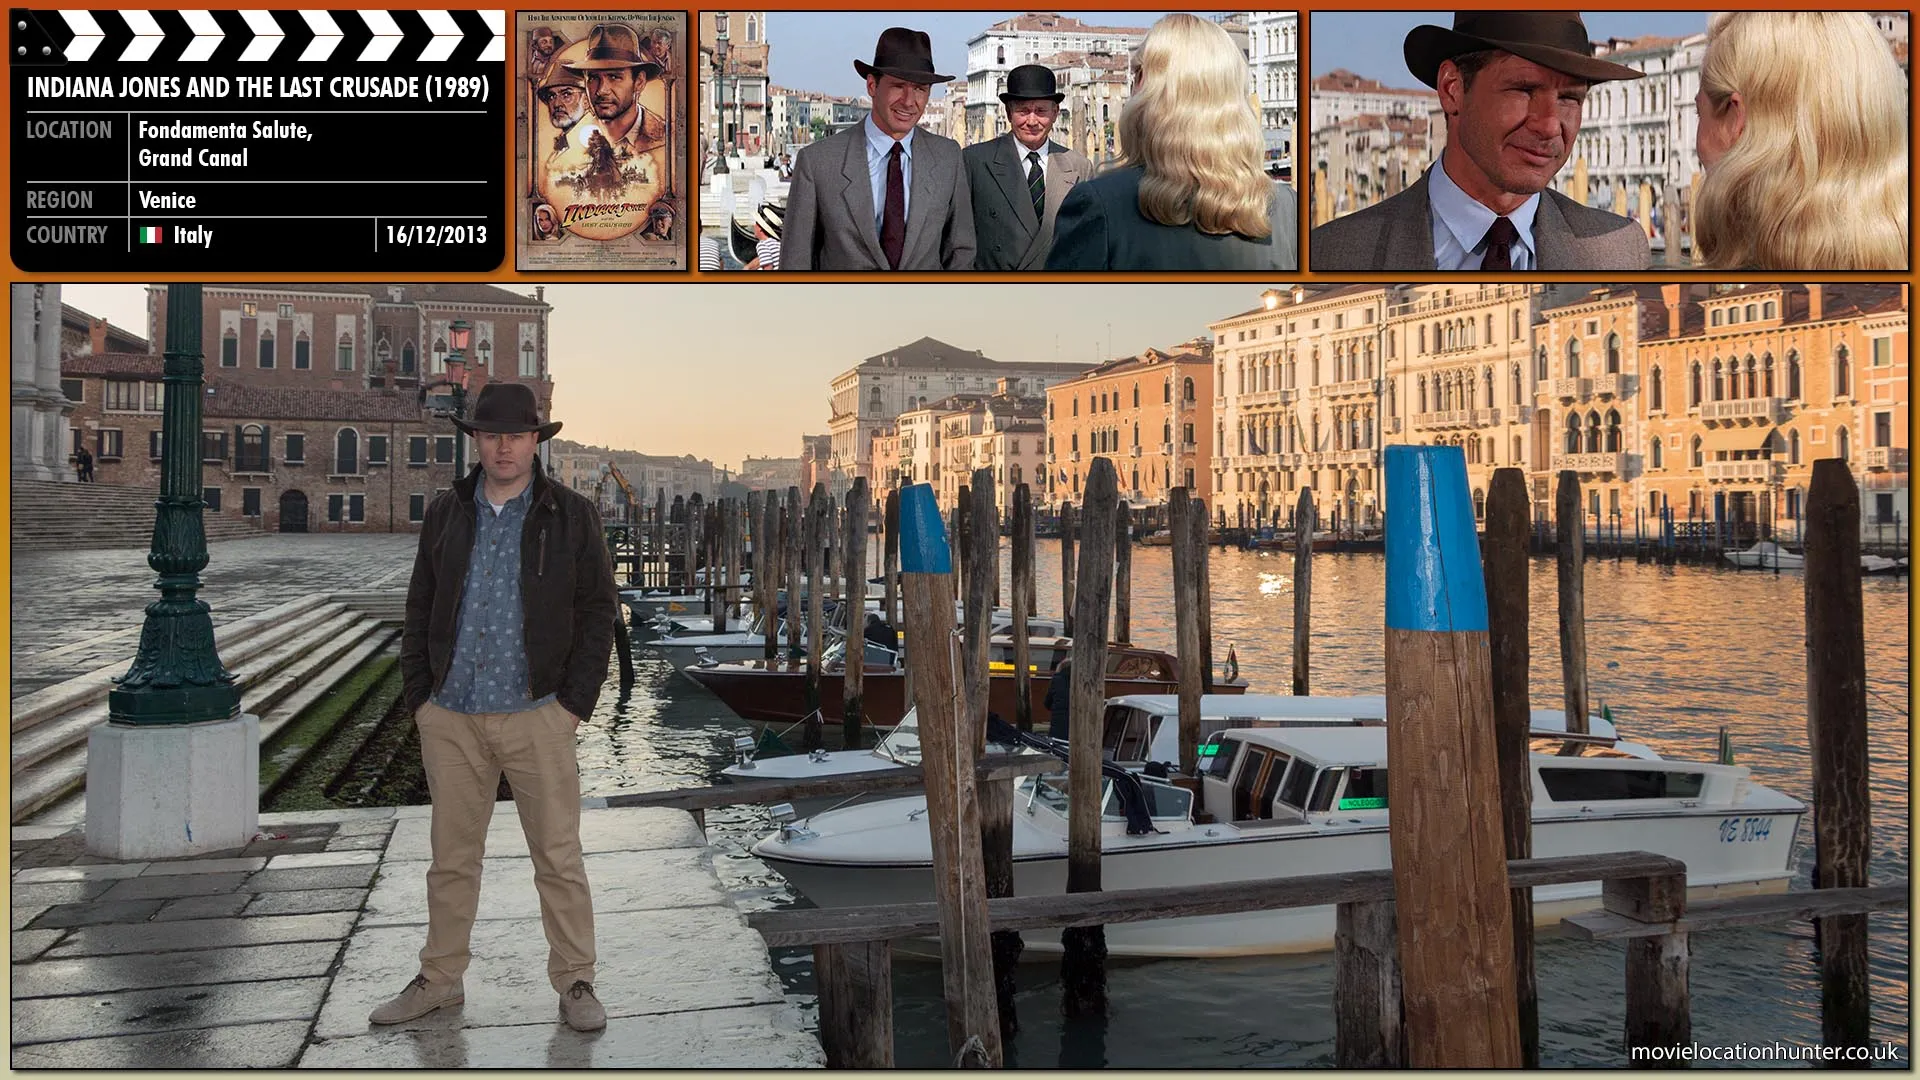 Filming location photo, shot in Italy, for Indiana Jones and the Last Crusade (1989). Scene description: As Indy (Harrison Ford) and Marcus (Denholm Elliott) arrive in Venice they discuss how they will recognise Dr. Schneider (Alison Doody) when they are approached by a woman.